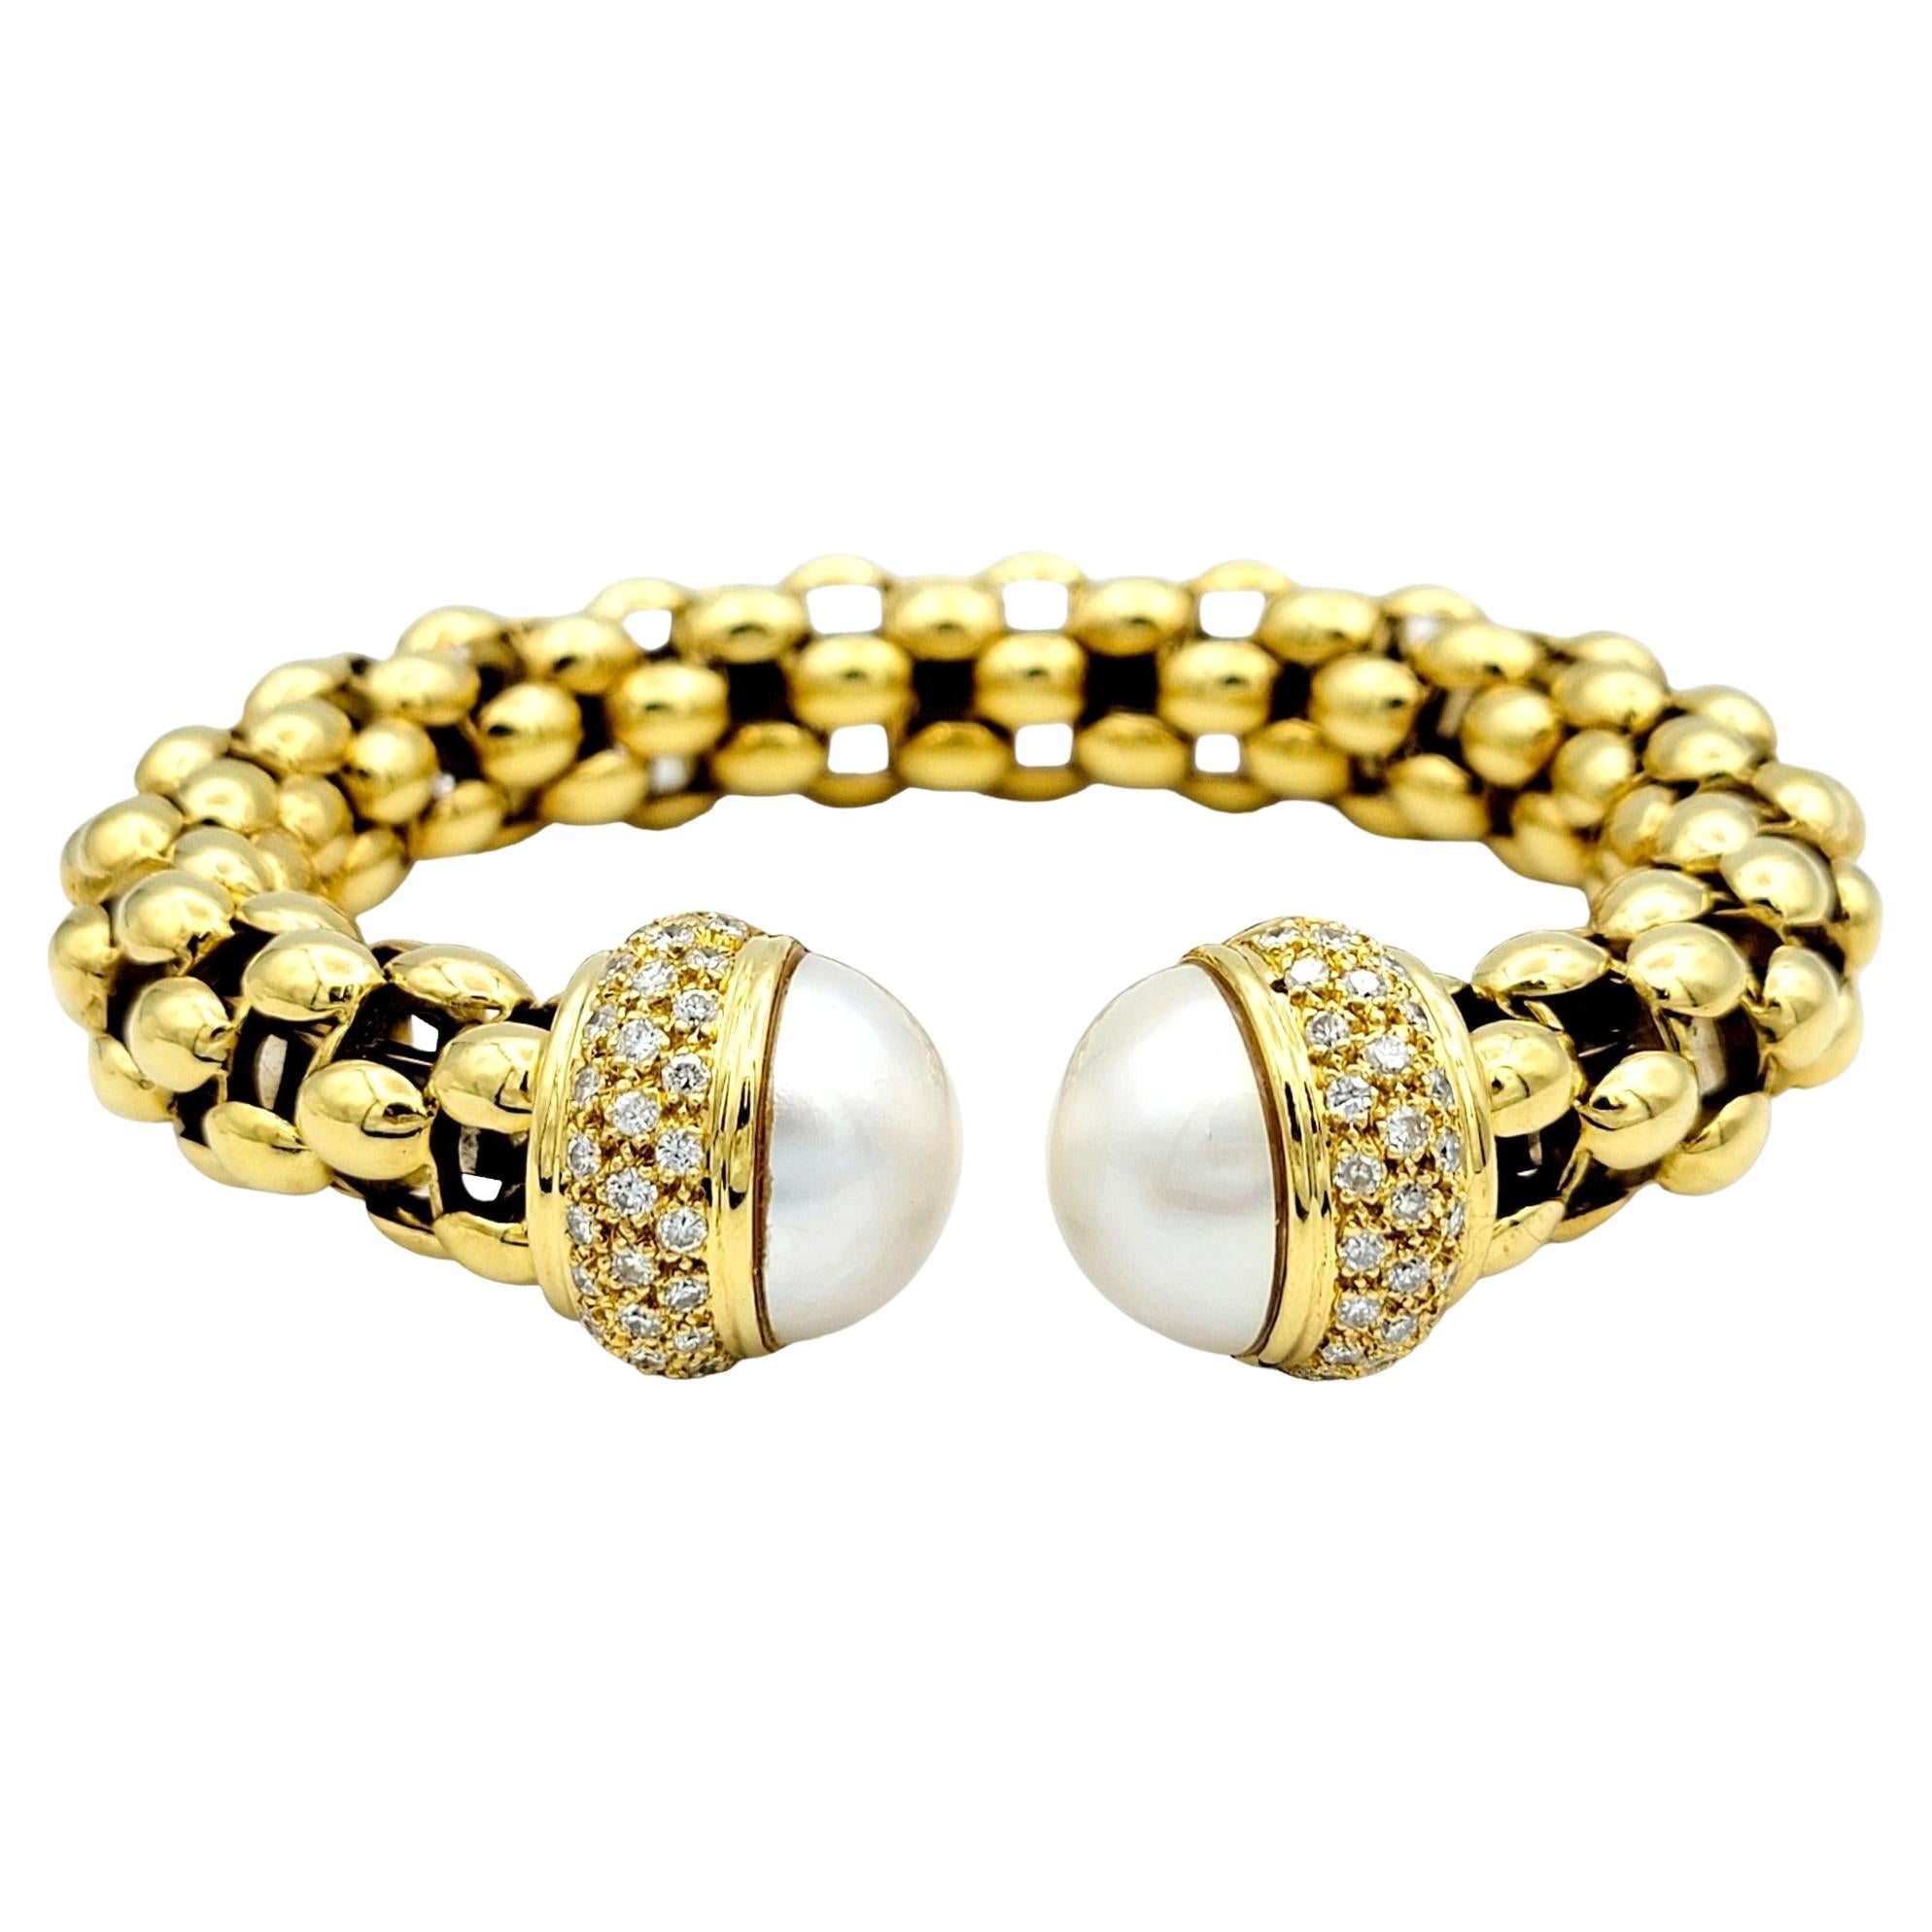 Button Pearl and Pave Diamond Chunky Flex Cuff Bracelet in 18 Karat Yellow Gold